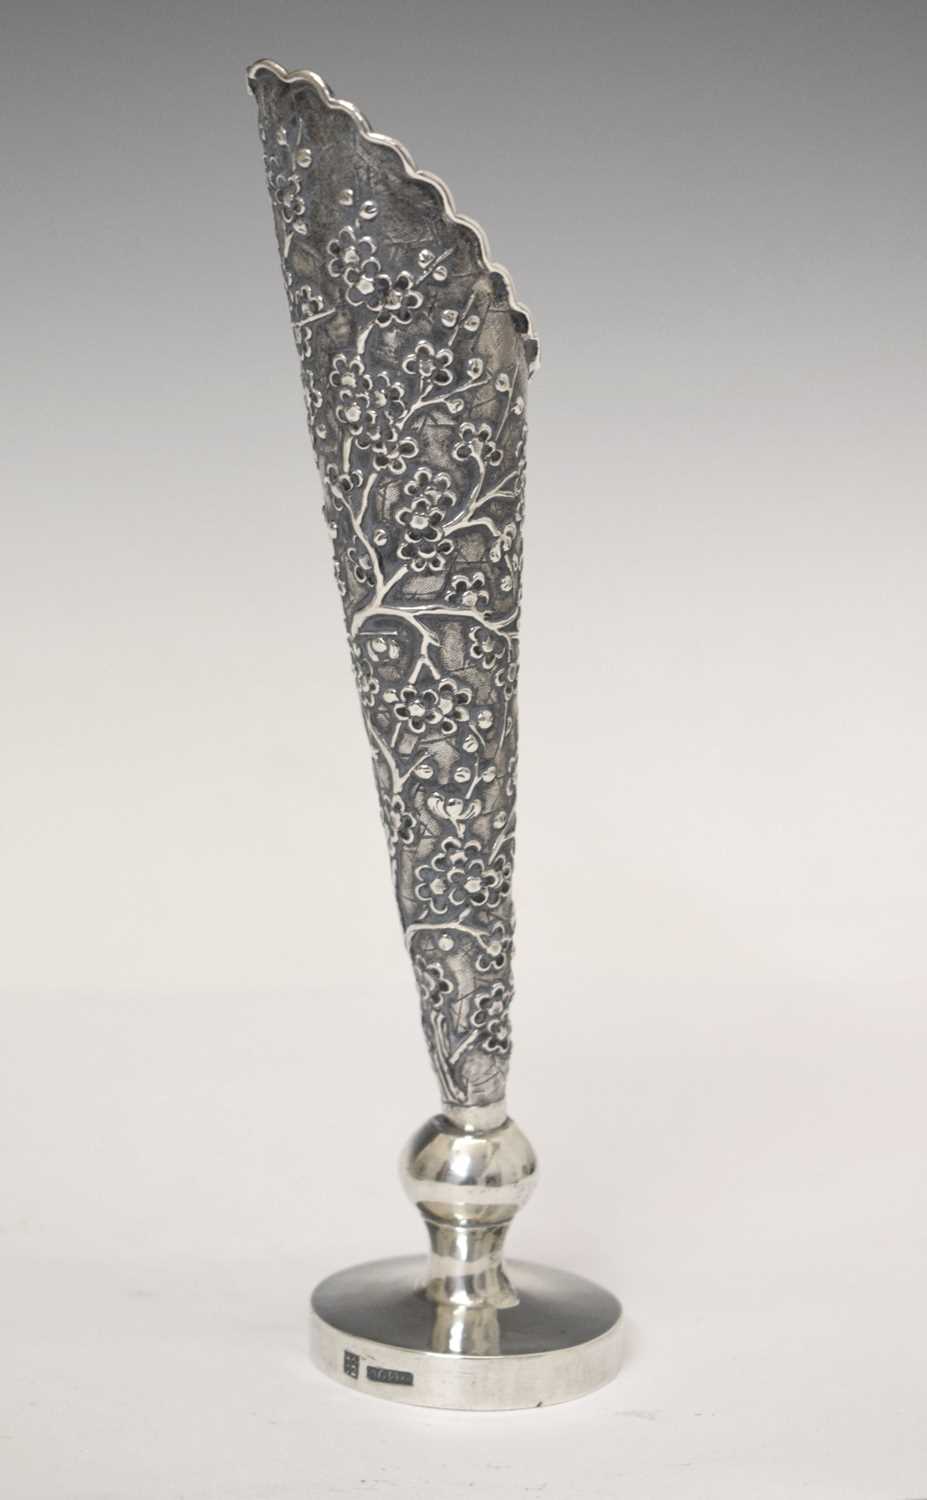 Late 19th/early 20th century Chinese export white-metal bud vase